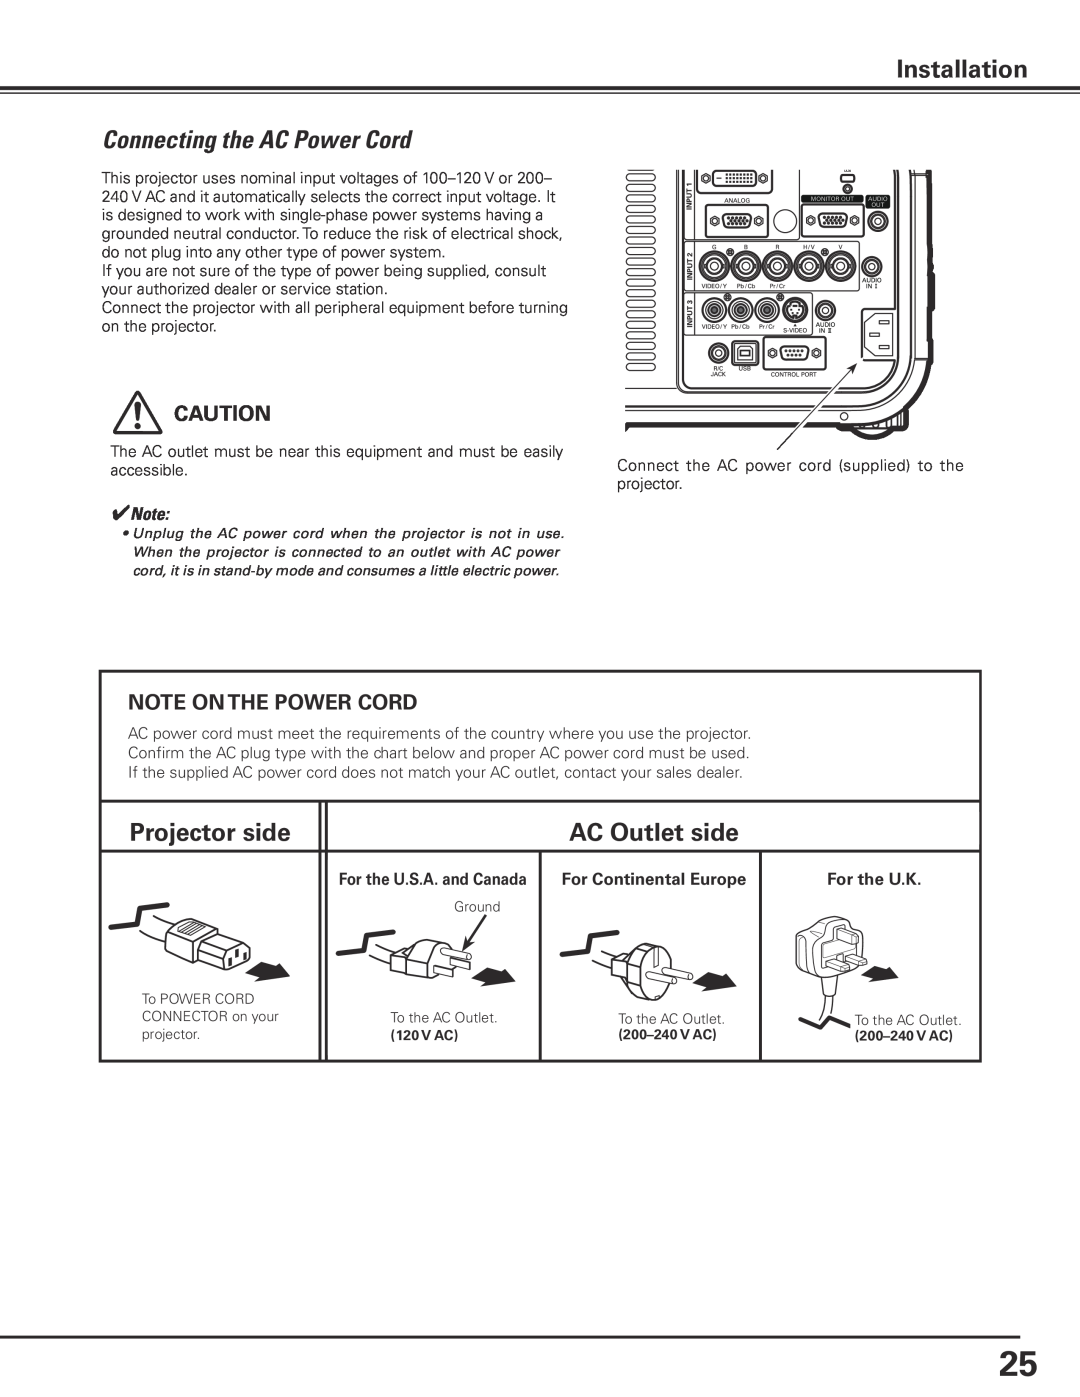 Sanyo PLC-XP200L owner manual Connecting the AC Power Cord, Projector side, AC Outlet side, Installation 